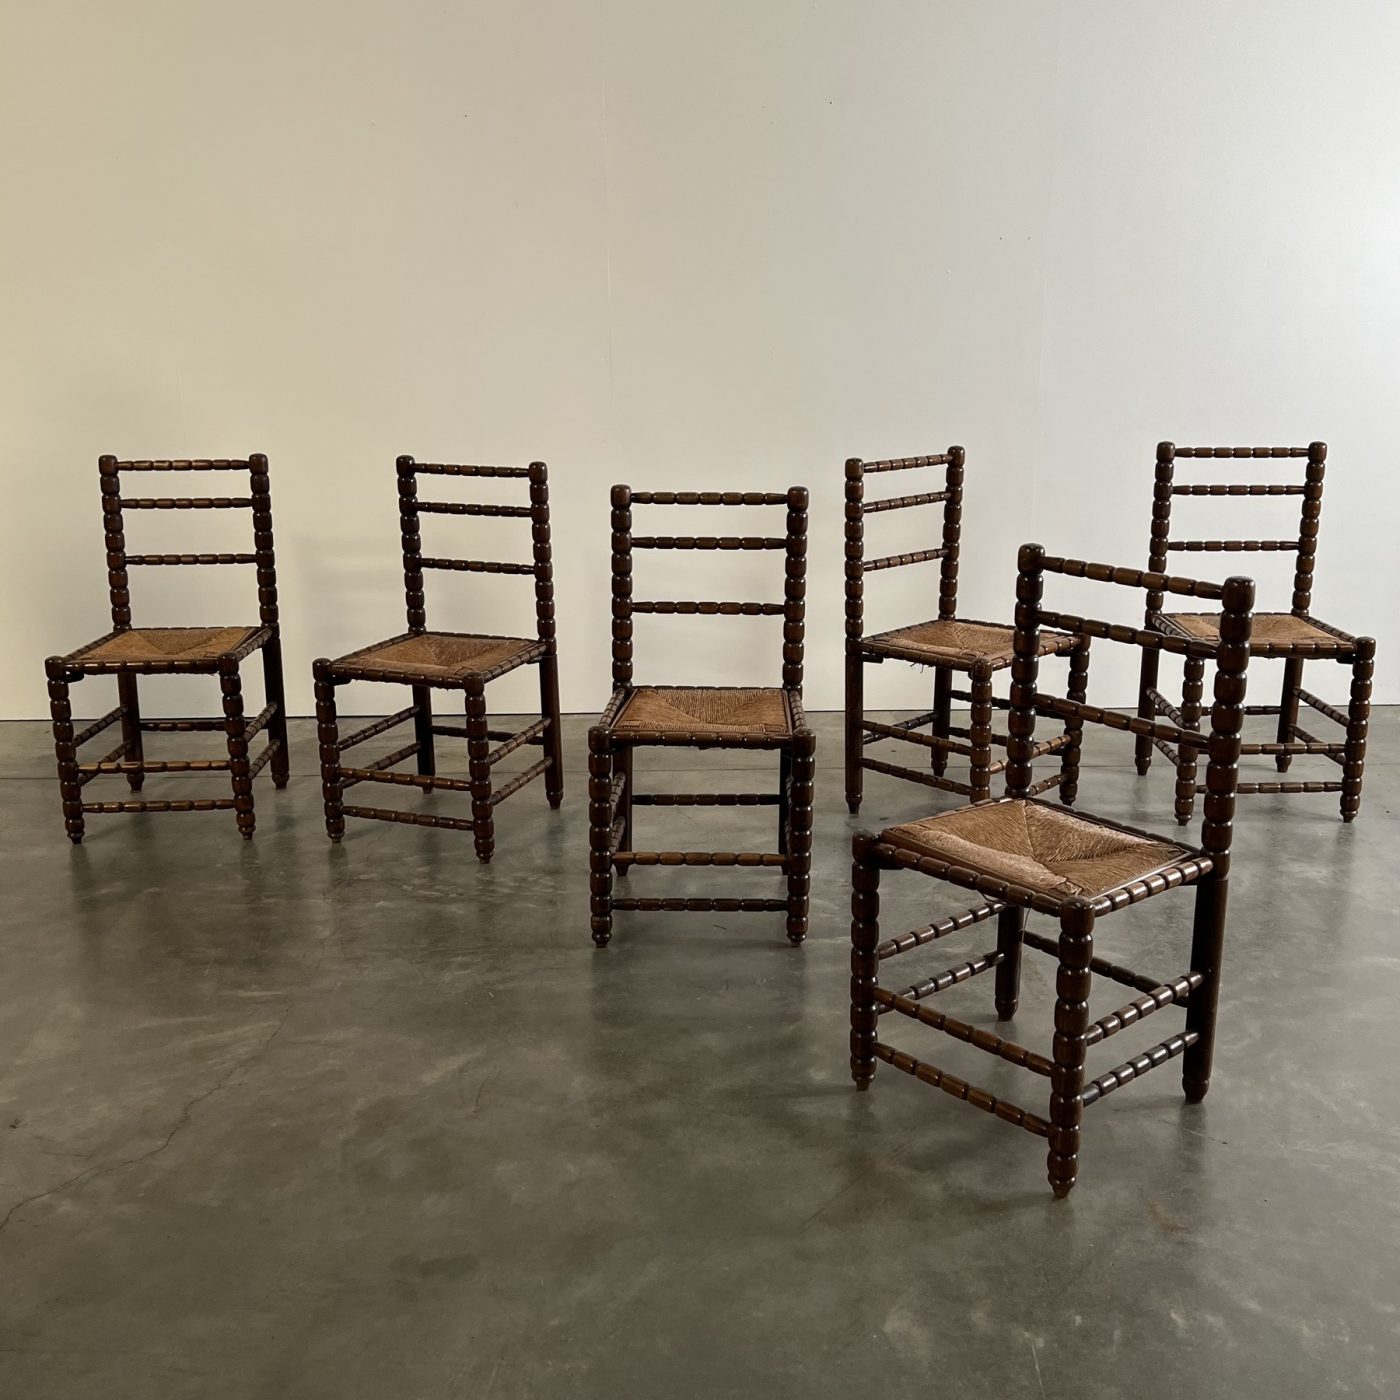 objet-wooden-chairs0010